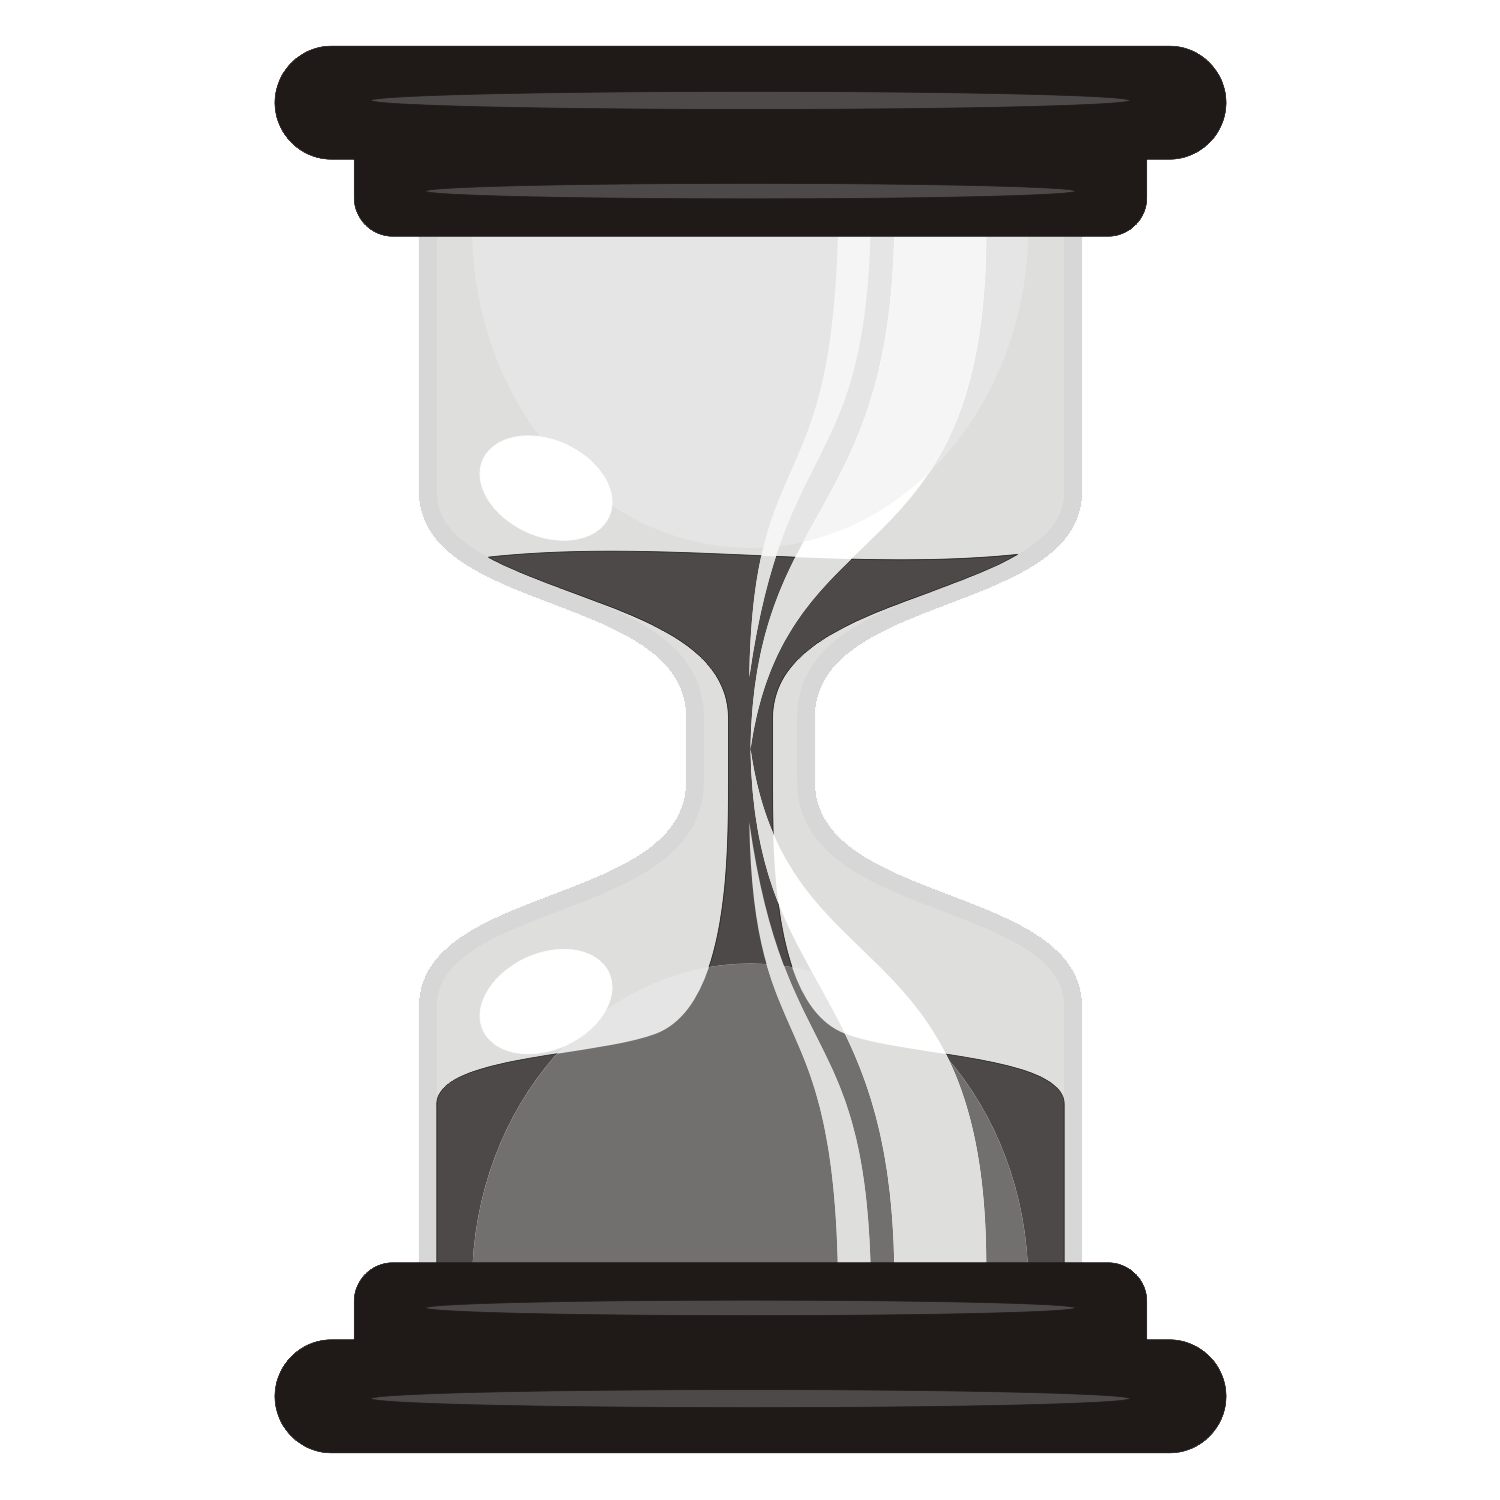 Hourglass Png File - Hourglass, Transparent background PNG HD thumbnail